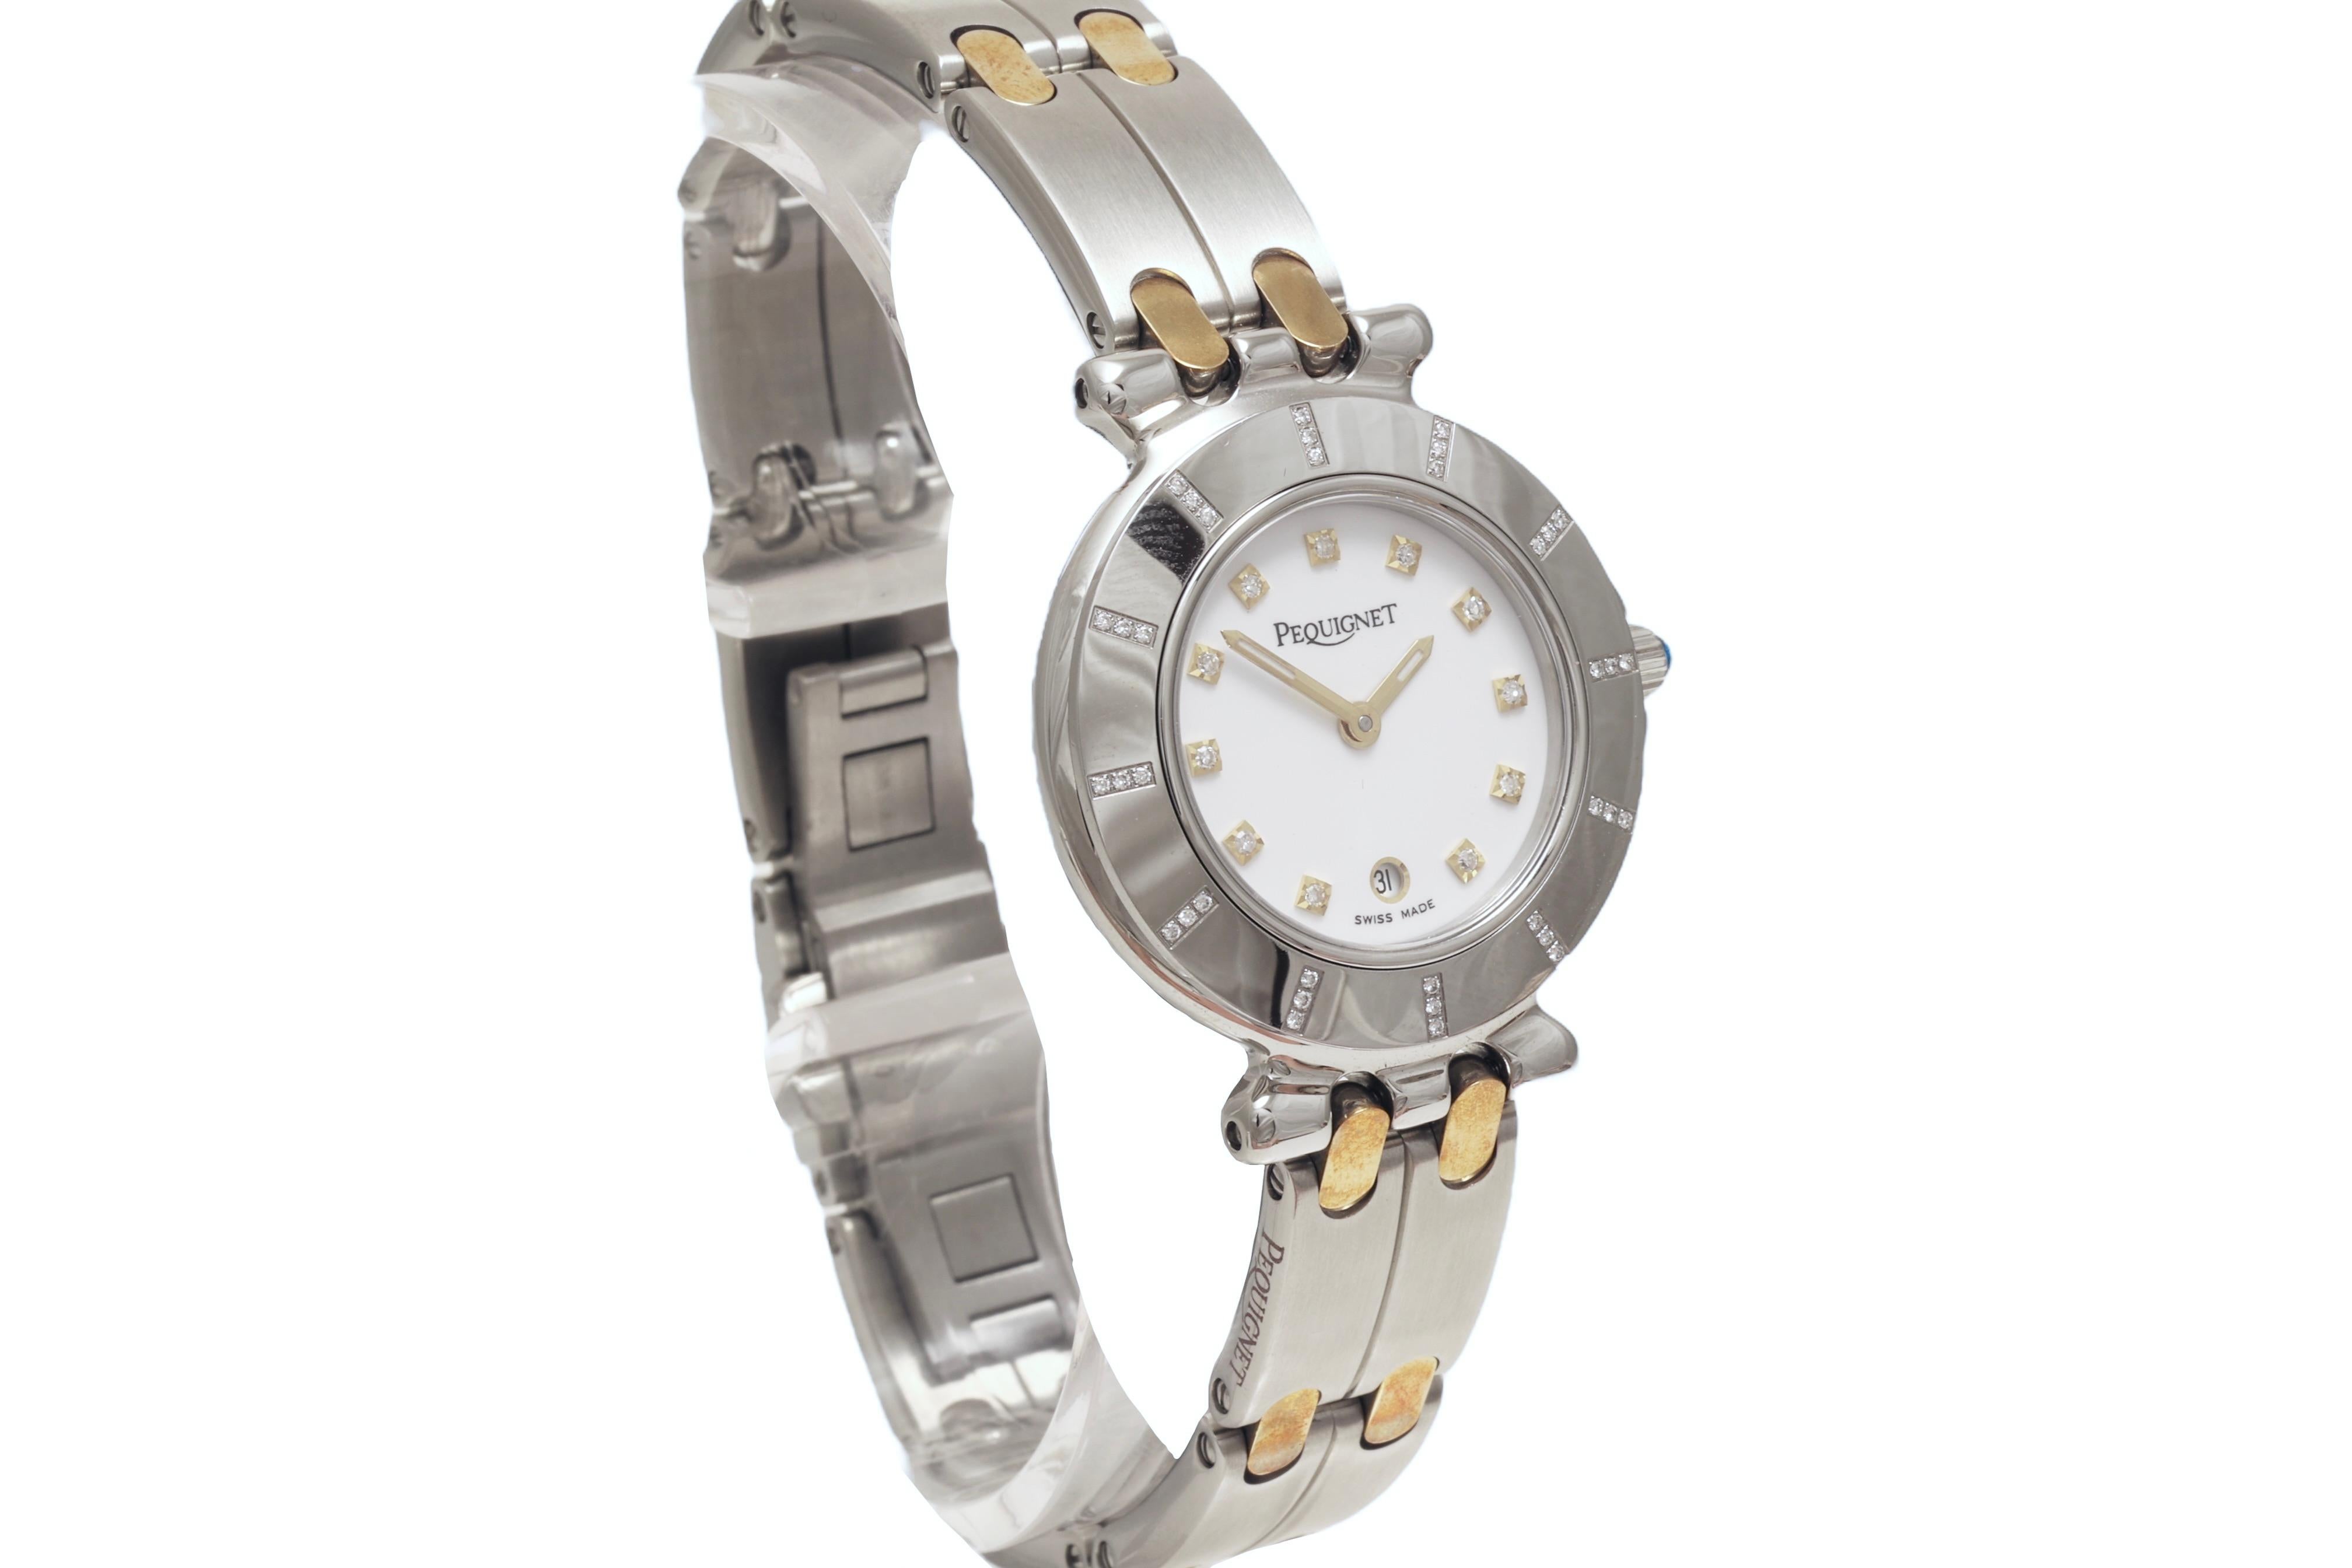 Artisan Steel & Gold EP Pequignet Diamonds Wristwatch Moorea Collection With Box & Paper For Sale